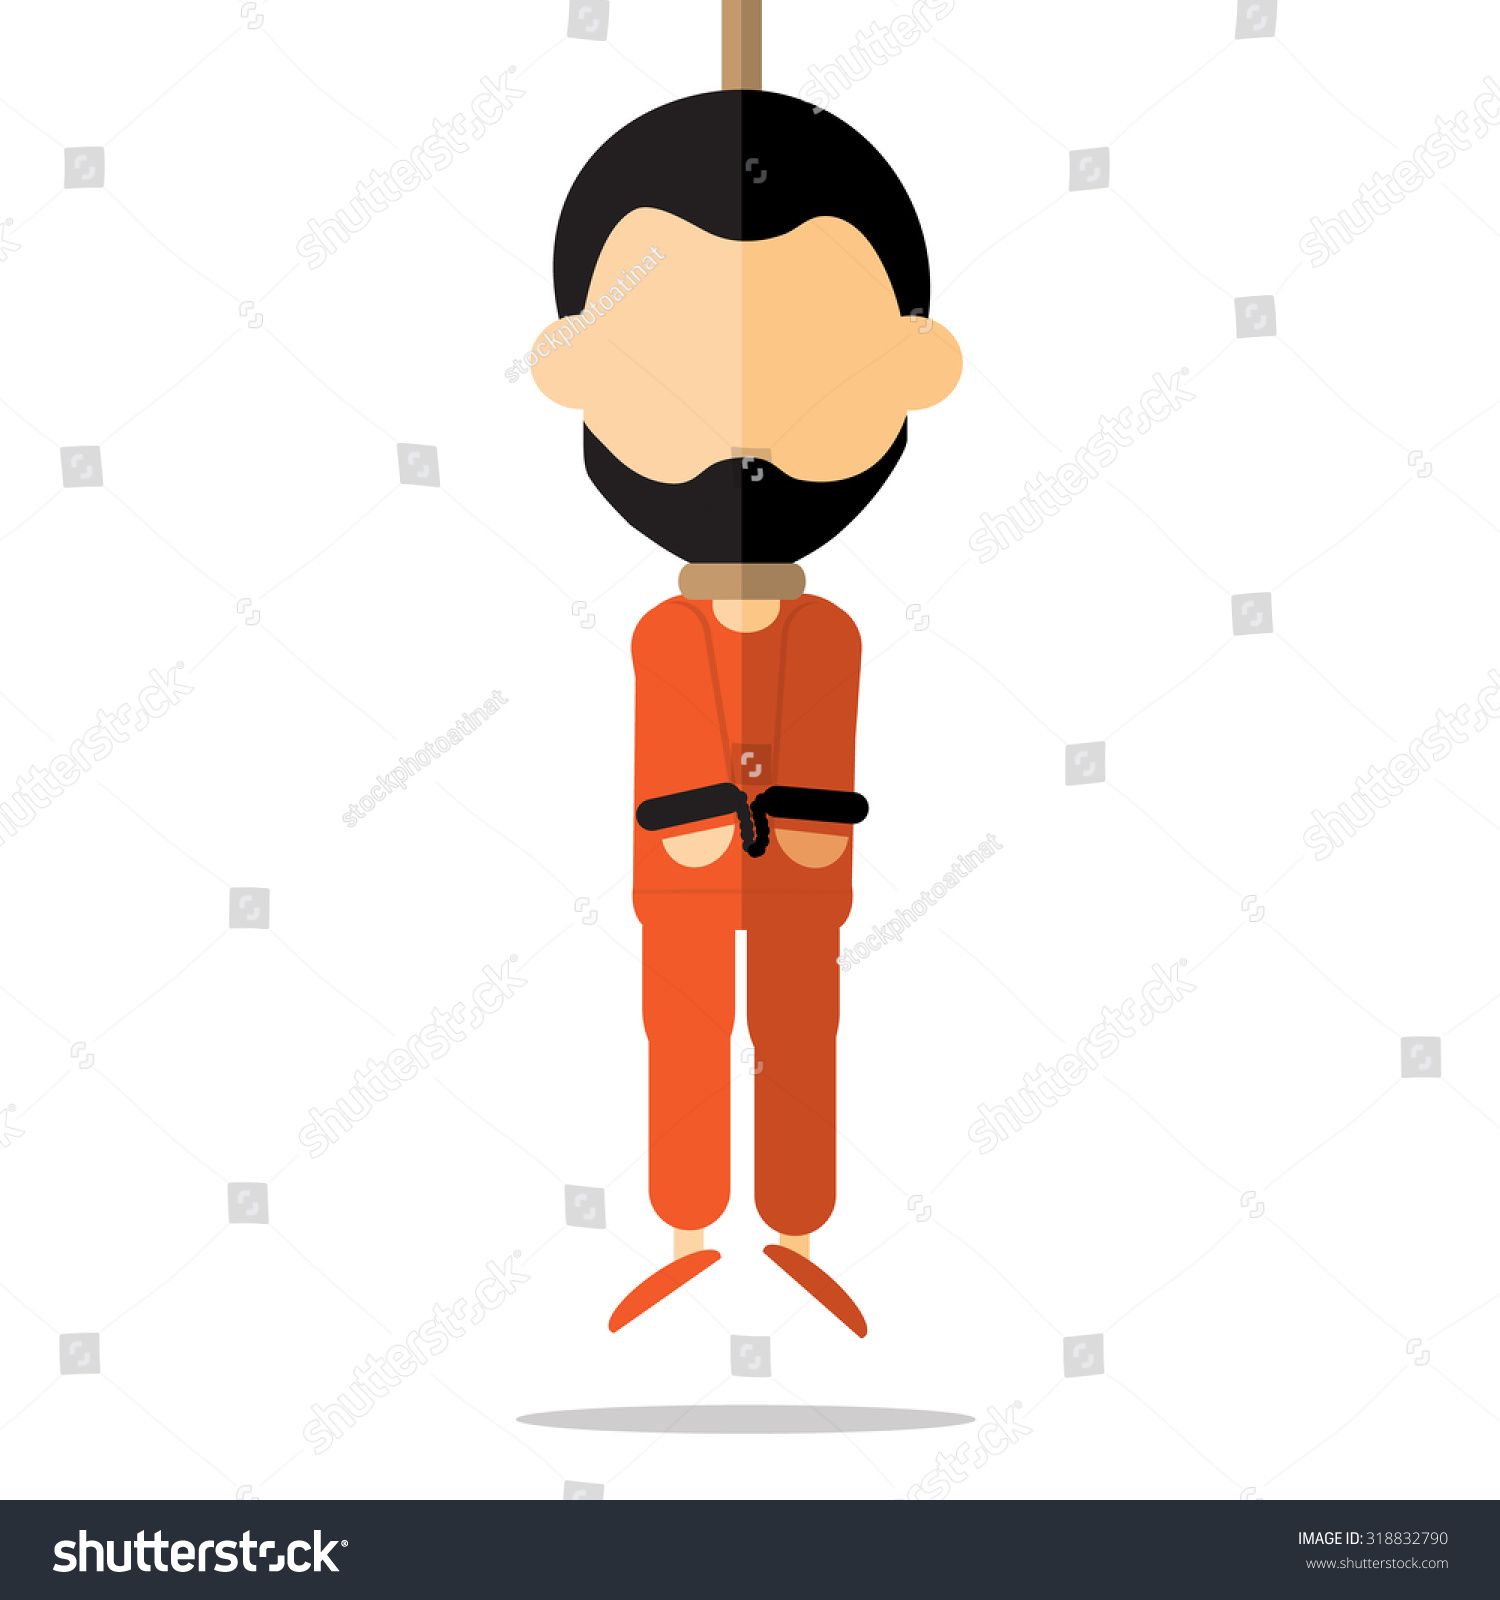 Executed Prisoners Cartoon Vector Stock Vector (Royalty Free) 318832790